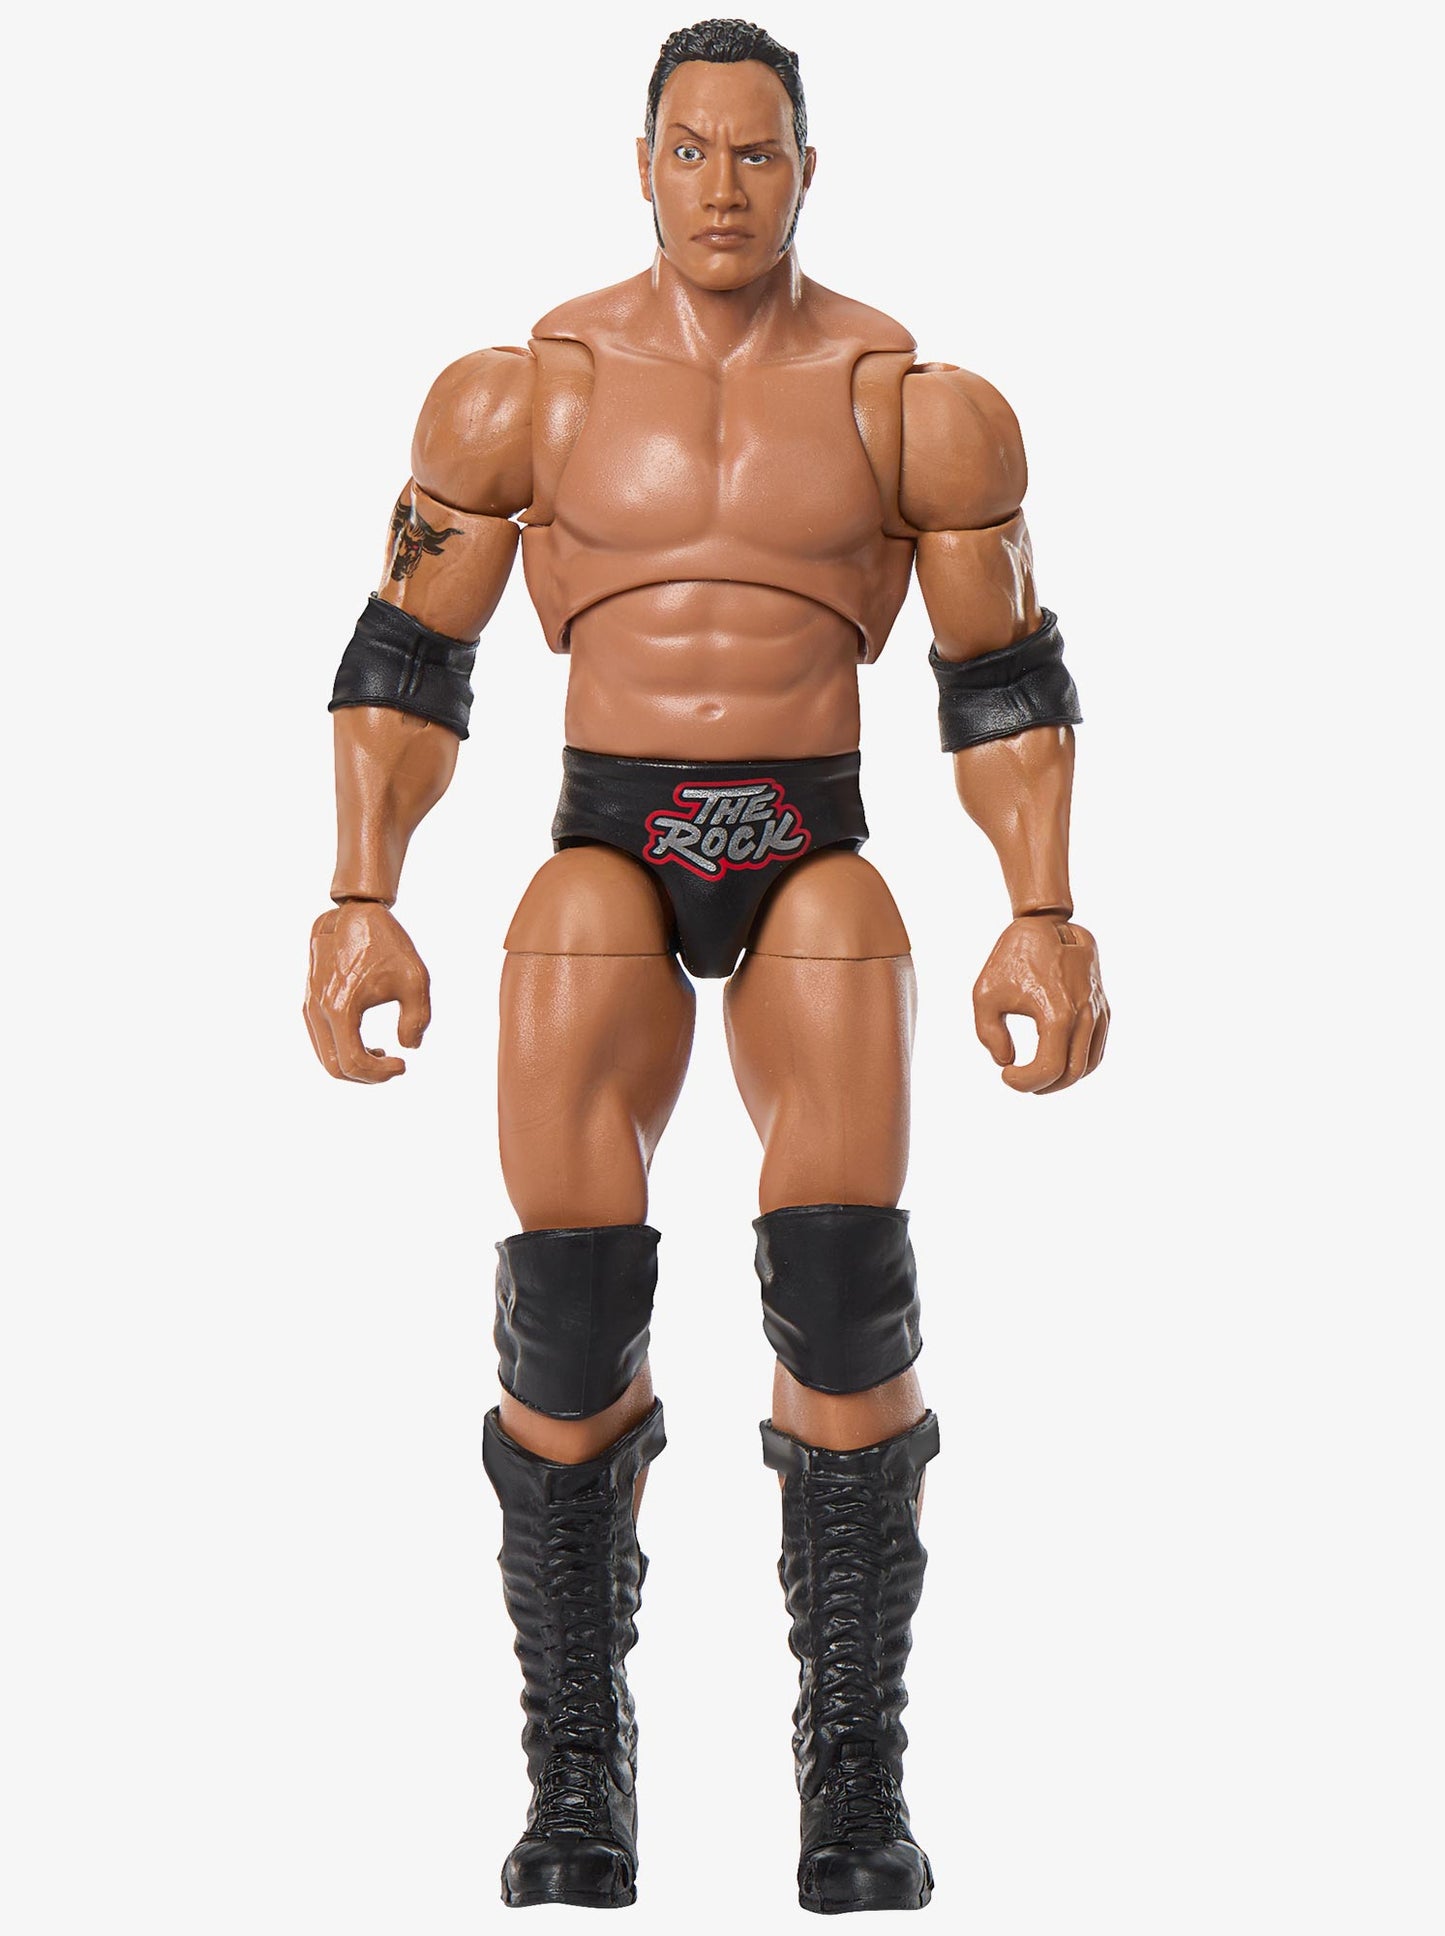 The Rock WWE Ultimate Edition Greatest Hits Series